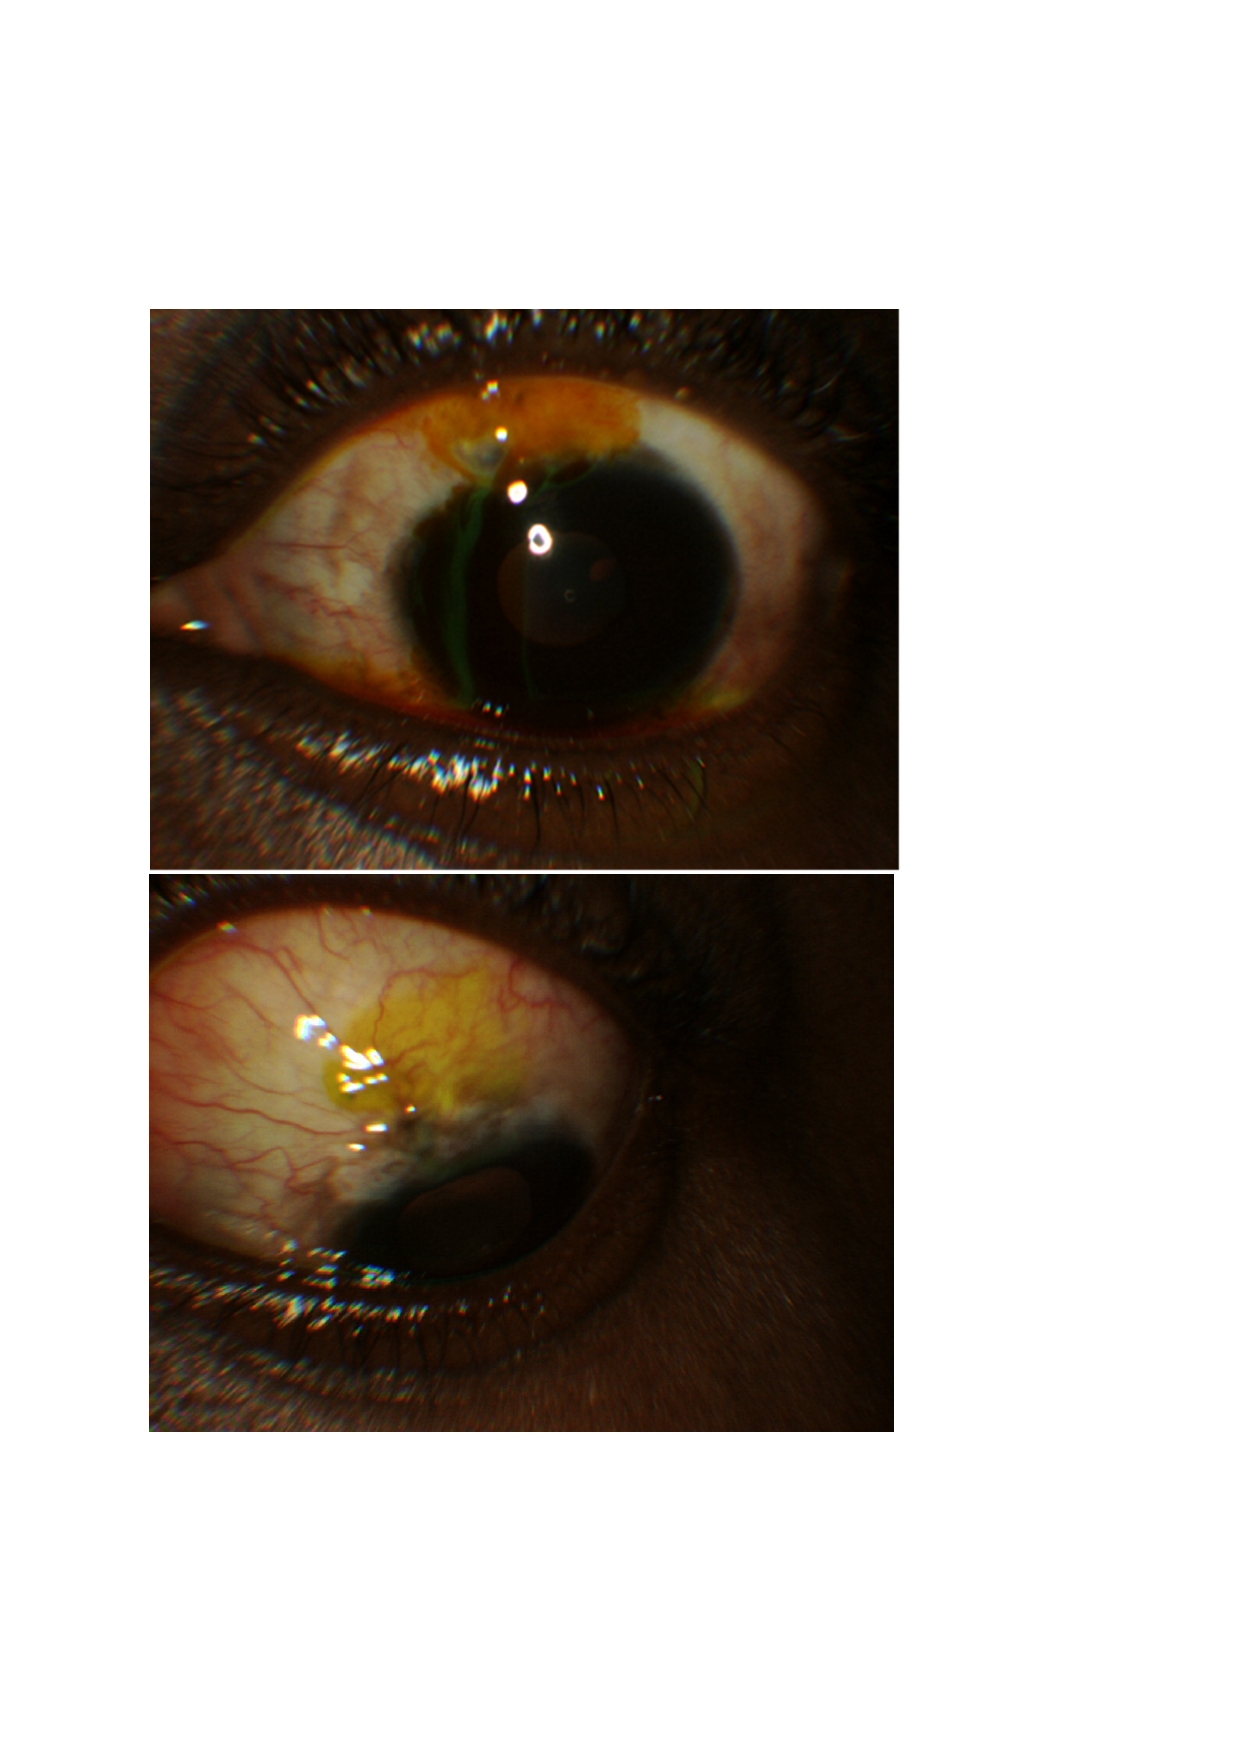 The Seidel test assesses for the occurrence of aqueous humor leakage through a defect in the integrity of the bleb. The image in the superior frame shows egress of aqueous from the anterior chamber through a thin fibrotic bleb occurring several years after trabeculectomy. This is made evident by the tracking of aqueous through the fluorescein stained ocular surface. In the lower frame, the image shows a cessation of aqueous leakage after revision of the bleb.  